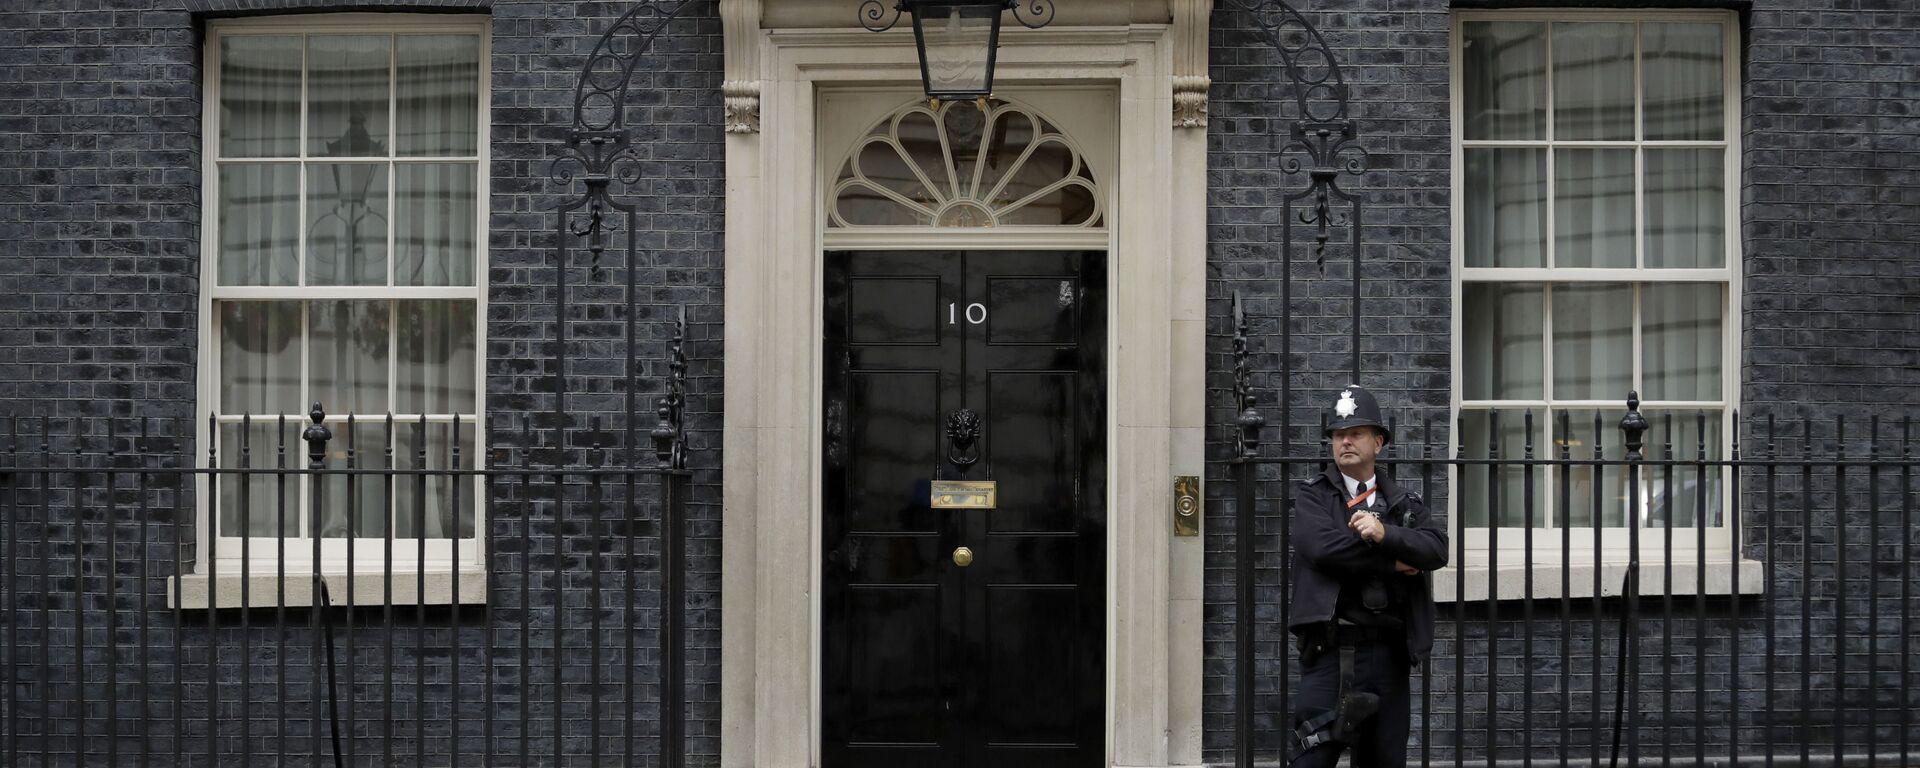 A police officer stands guard outside the door of 10 Downing Street in London, Friday, June 7, 2019 - Sputnik International, 1920, 28.05.2021